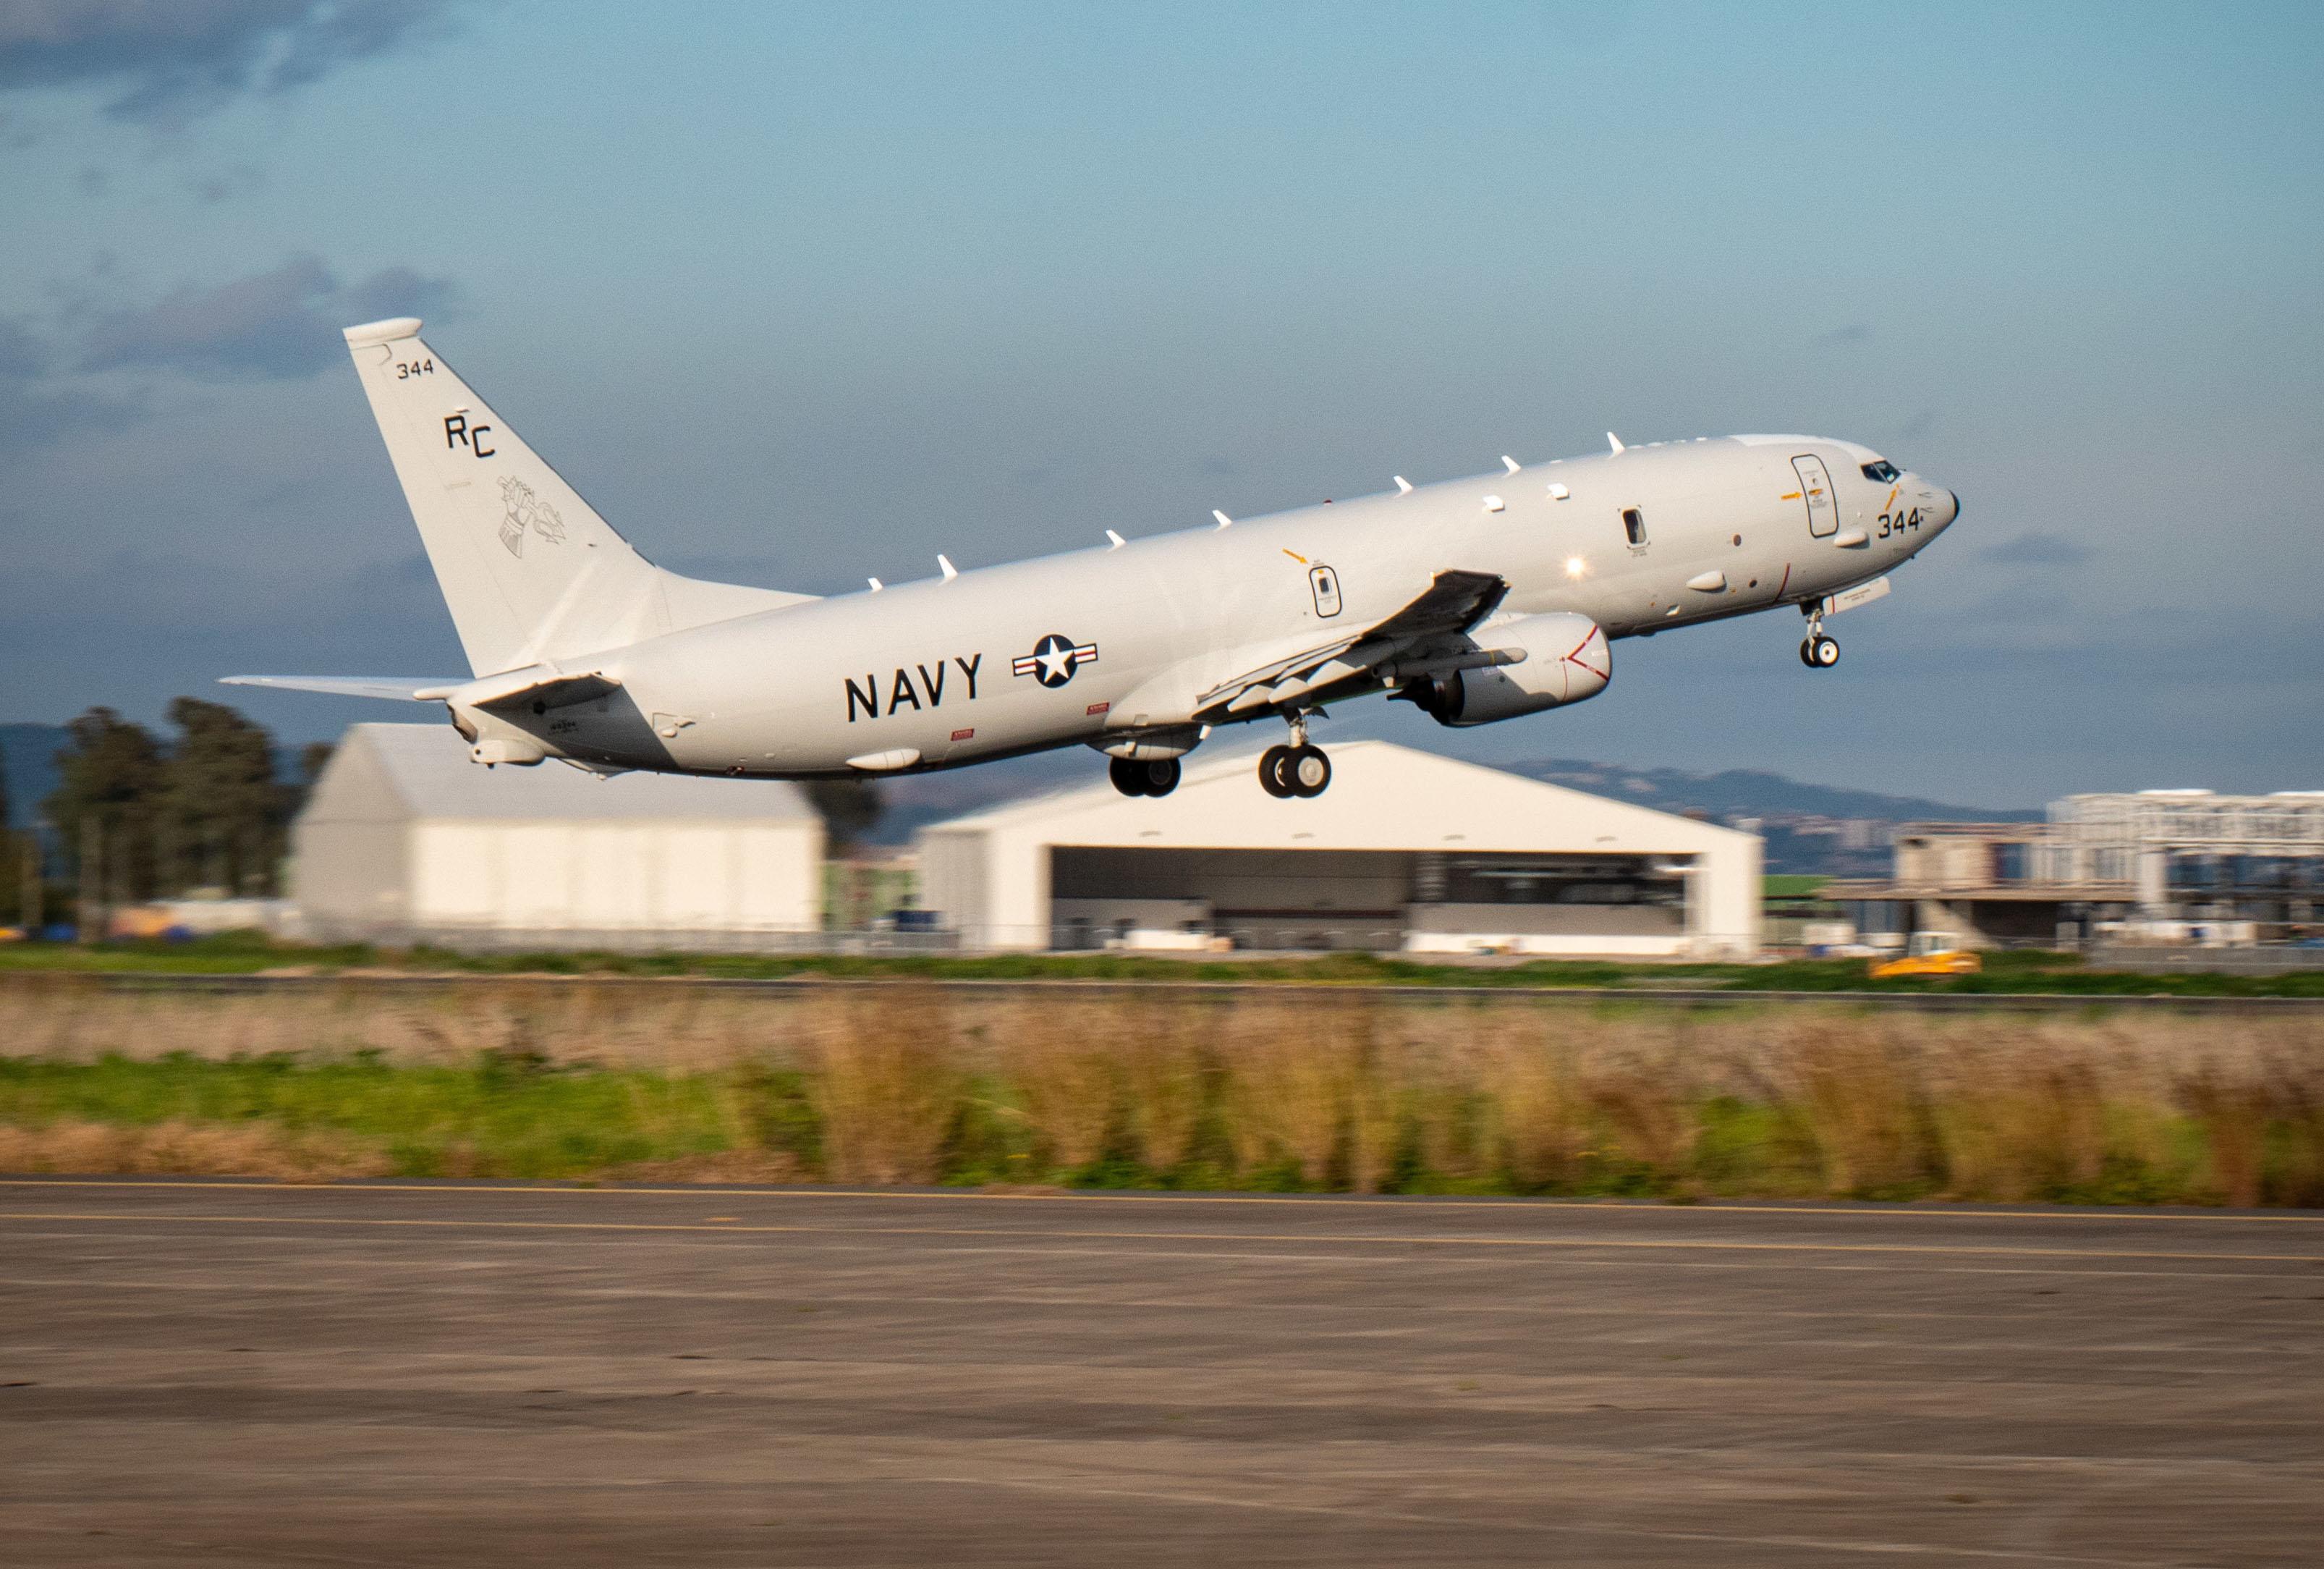  P-8A Poseidon maritime patrol aircraft, assigned to the "Grey Knights" of Patrol Squadron (VP) 46, takes off for its mission, Jan. 23, 2021.